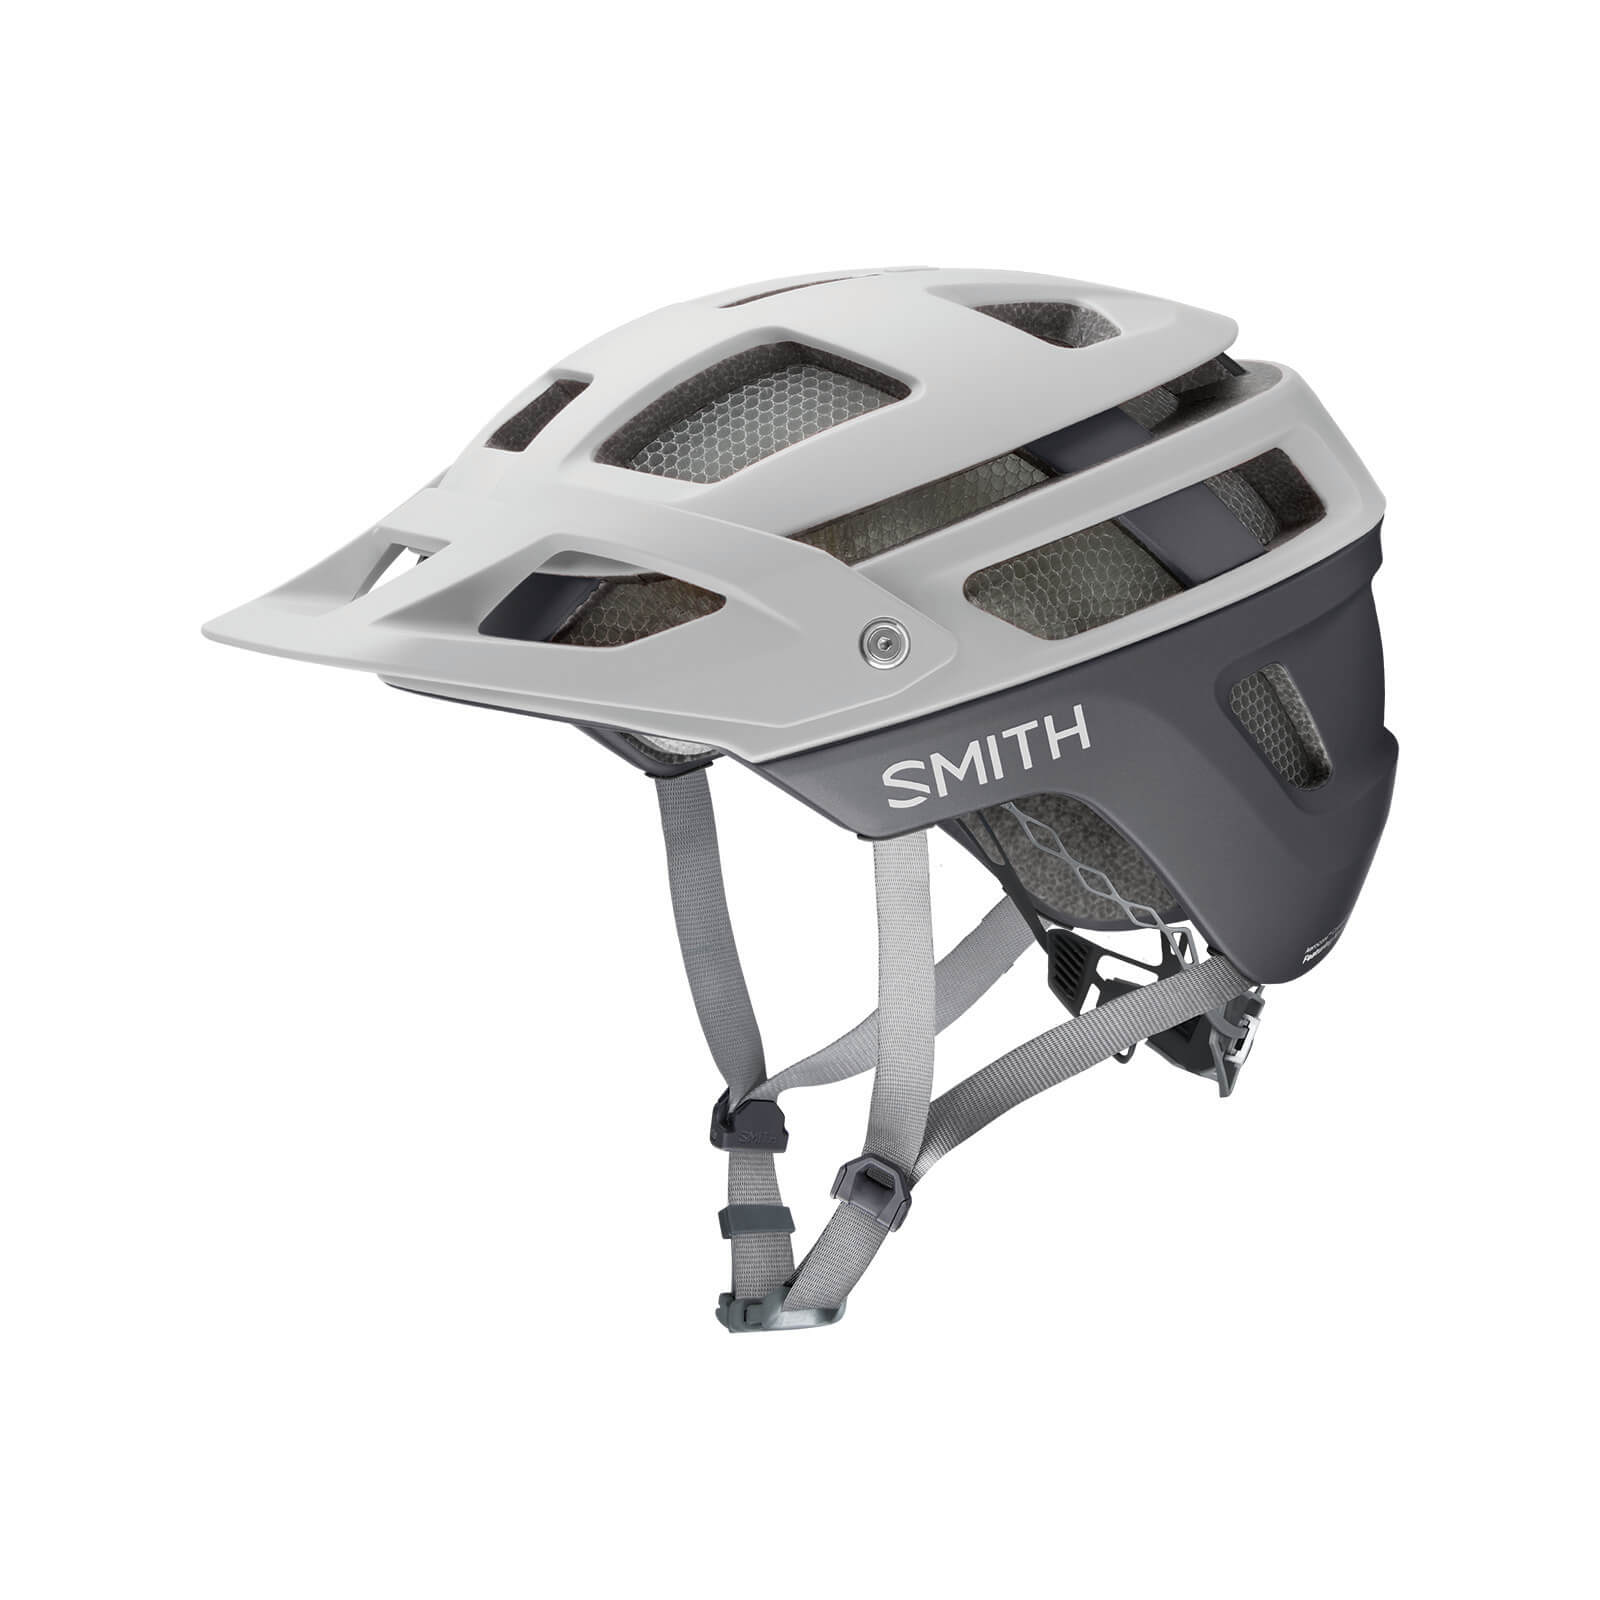 Smith Forefront 2 MIPS MTB Helmet - Large - Matte White Cement